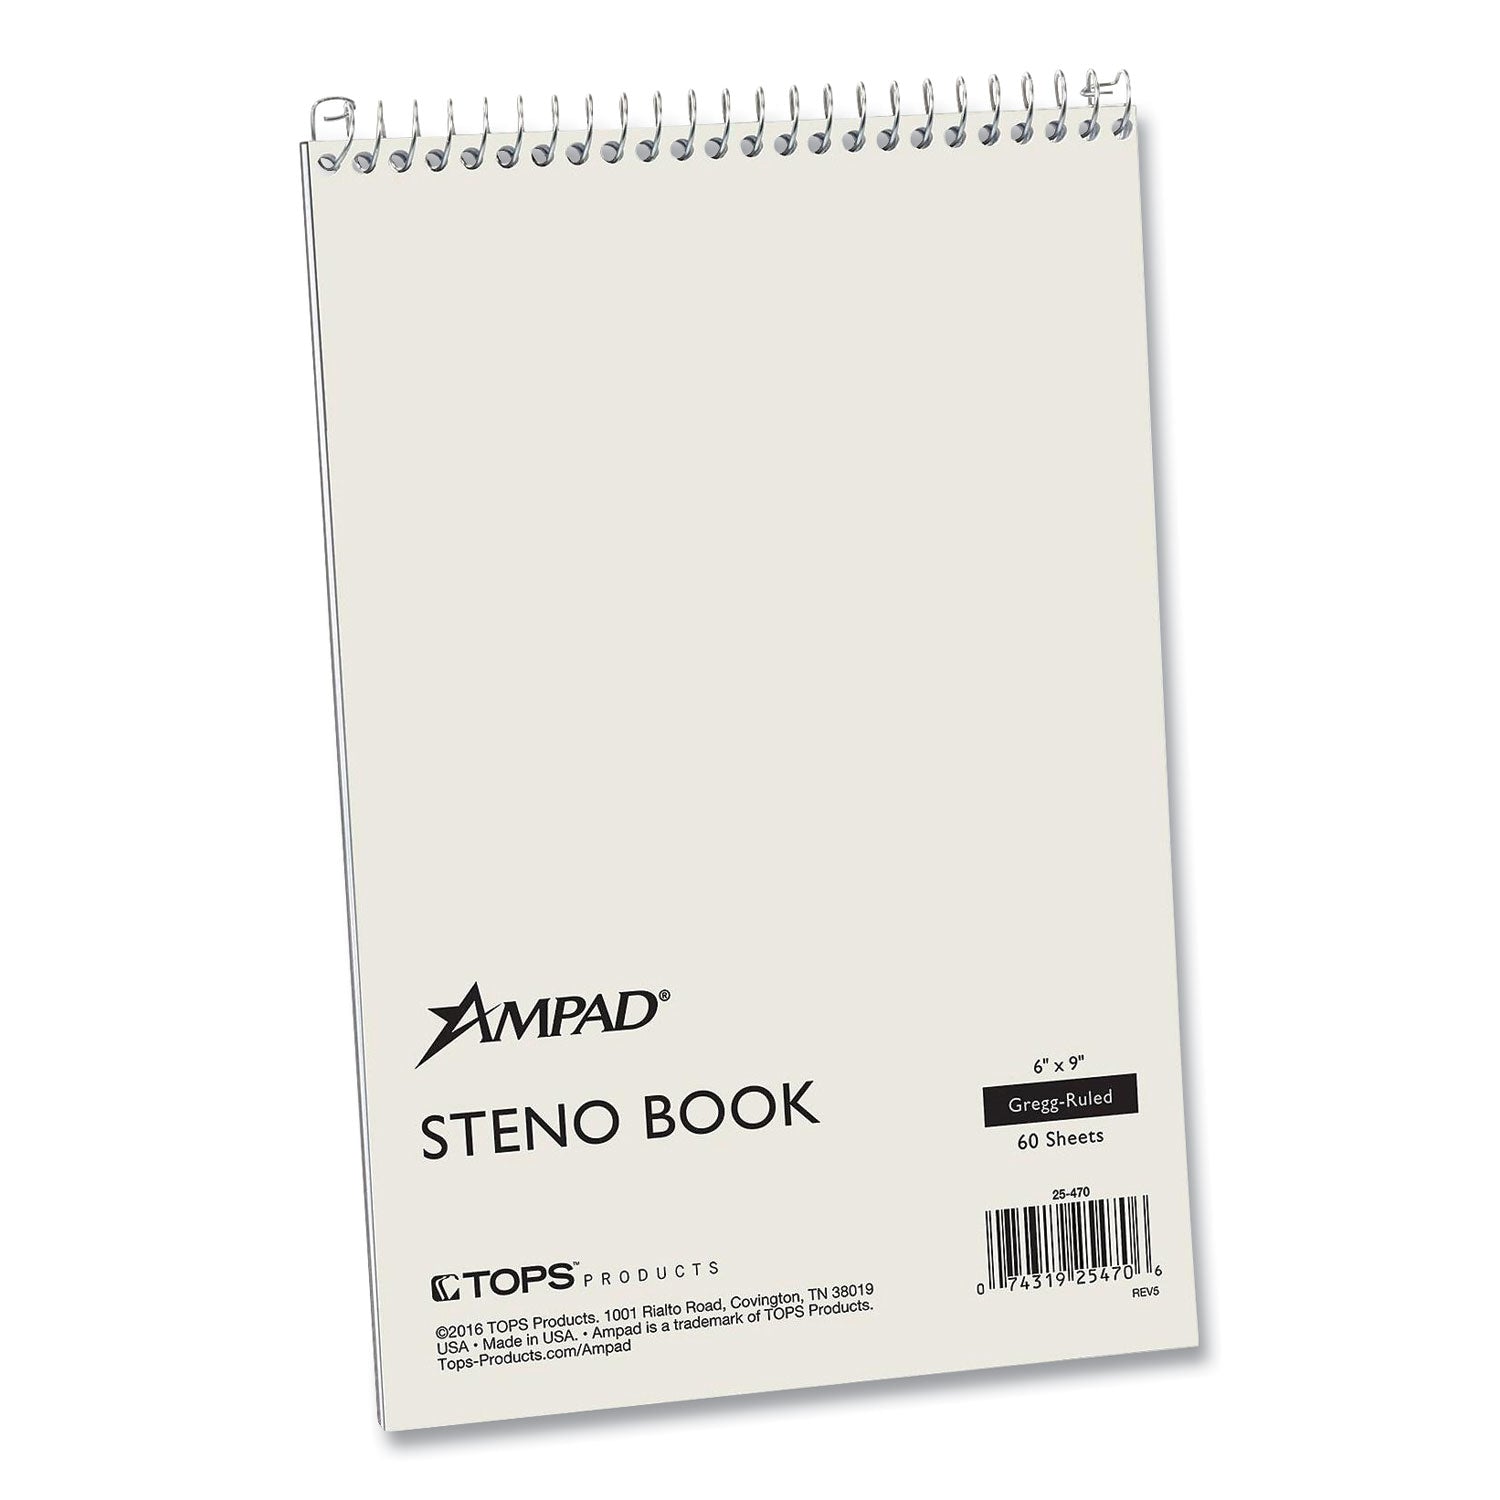 steno-pads-gregg-rule-white-cover-60-green-tint-6-x-9-sheets_amp25470 - 1